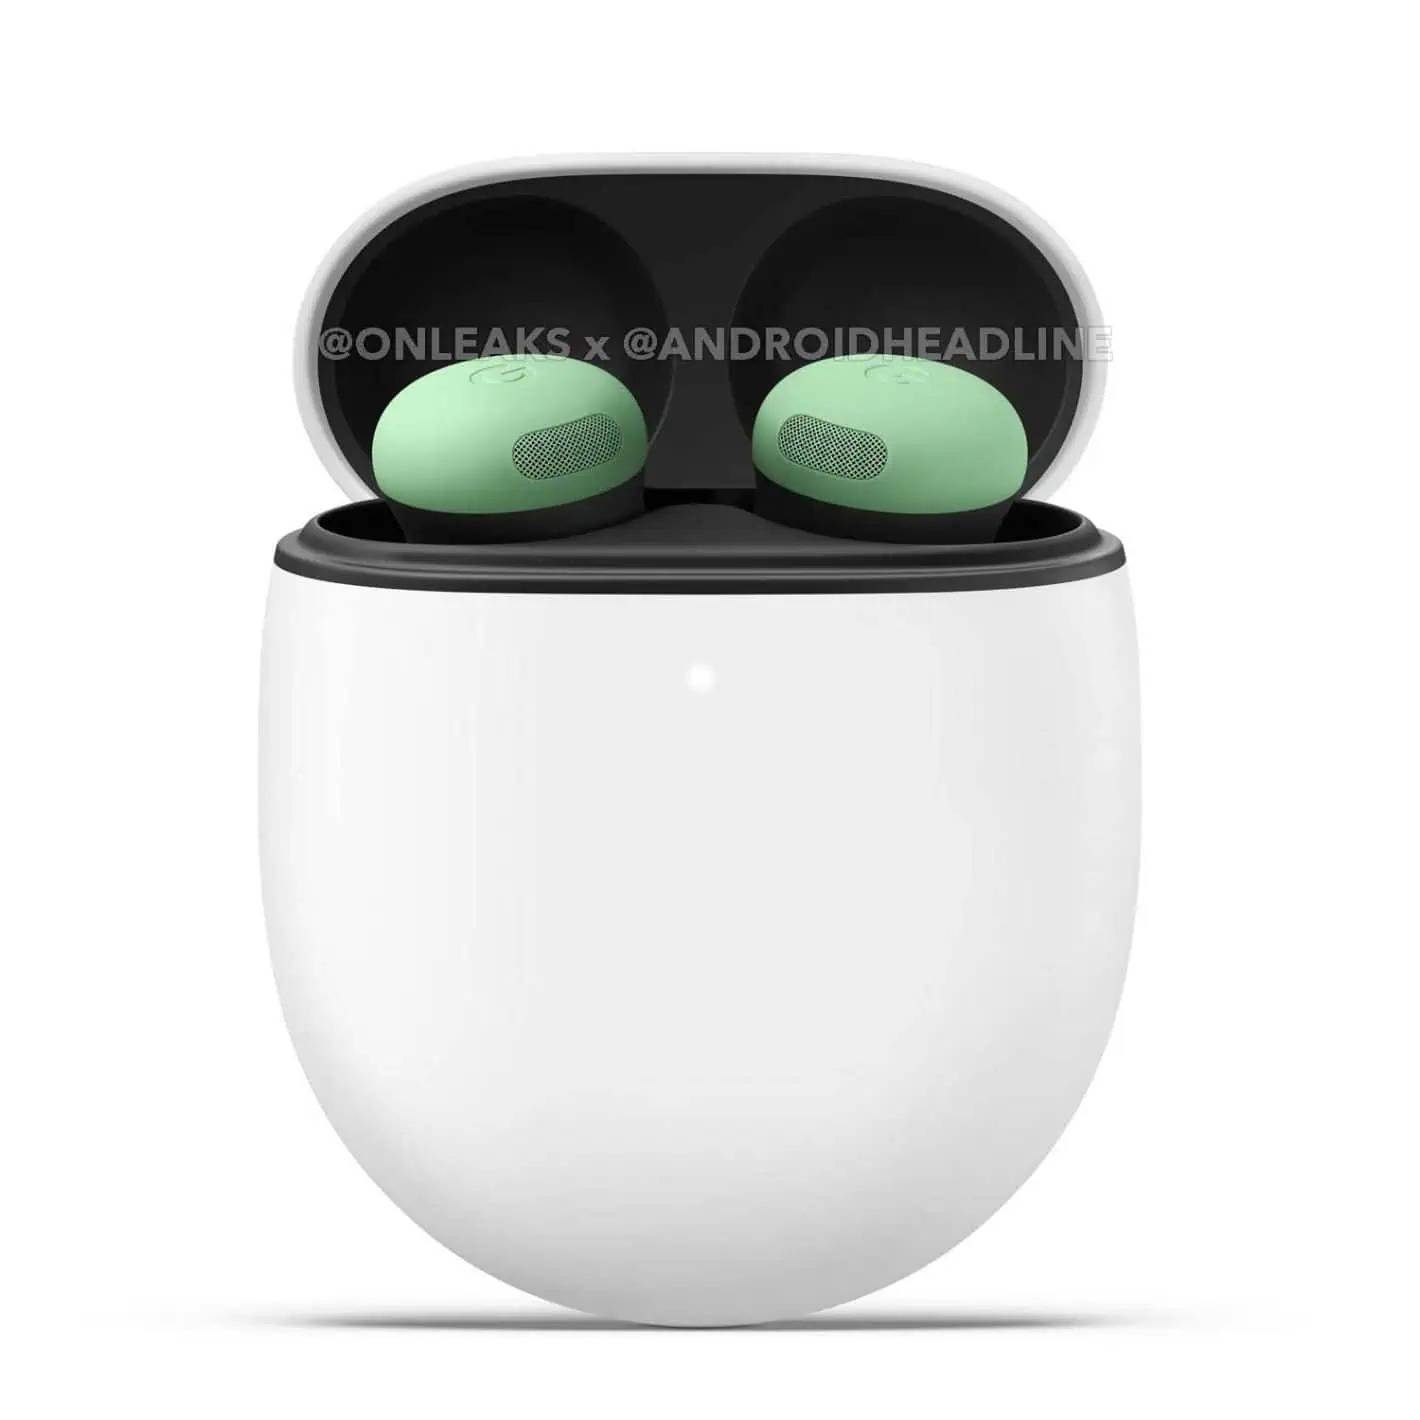 Leaked render of the green Pixel Buds Pro 2 on white background